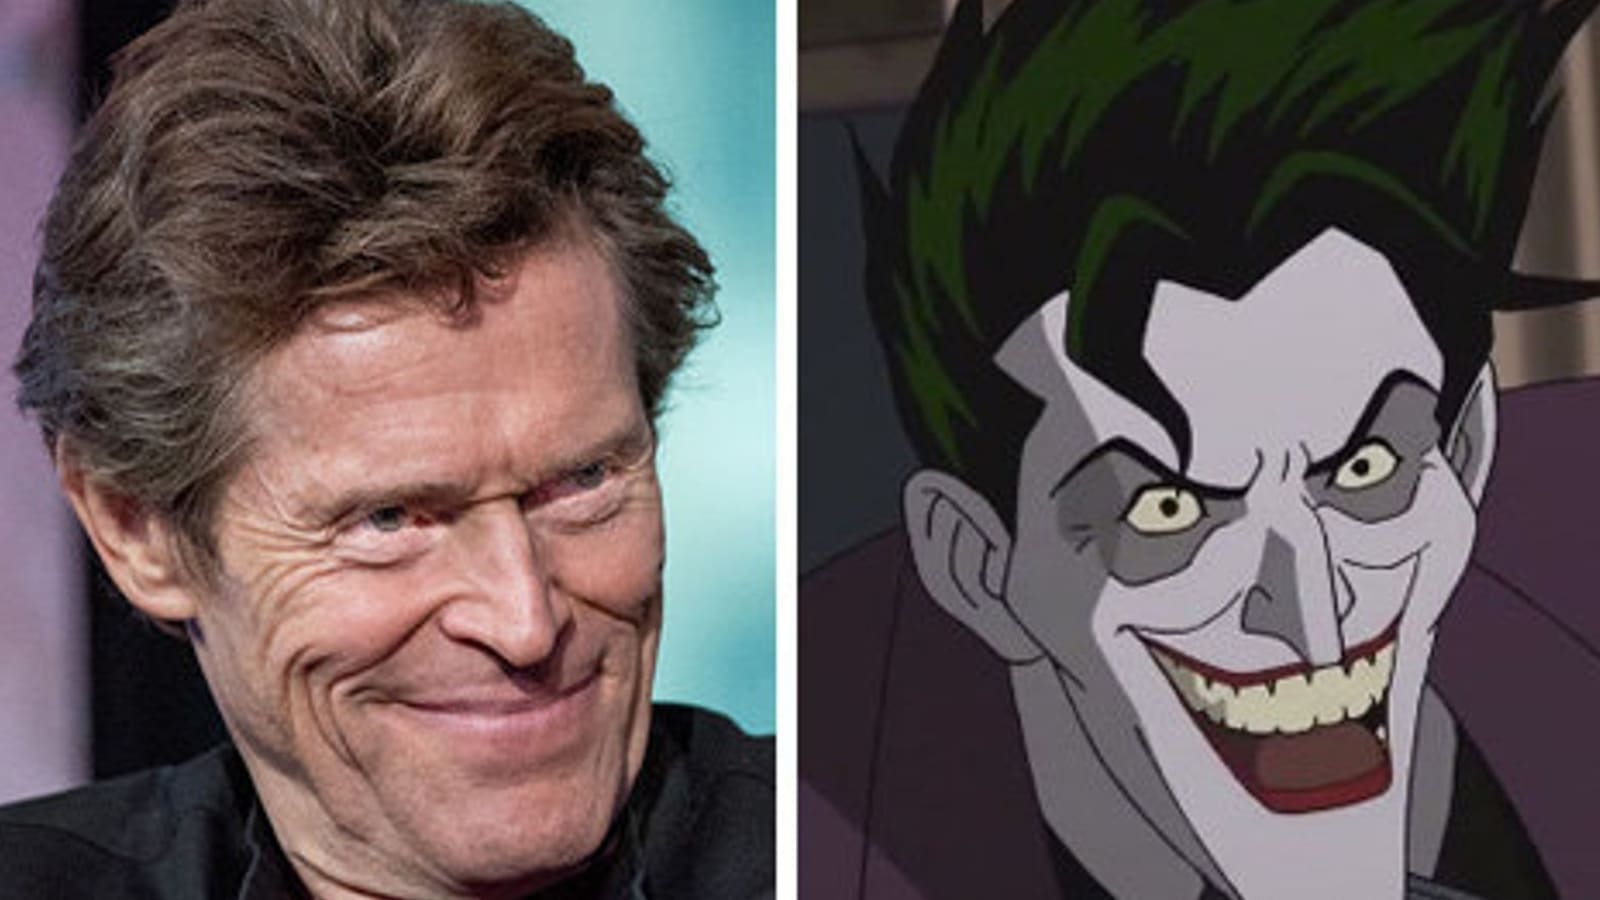 Willem Dafoe on playing Joker Nice to hear youve got the vibe of a sociopath Hollywood